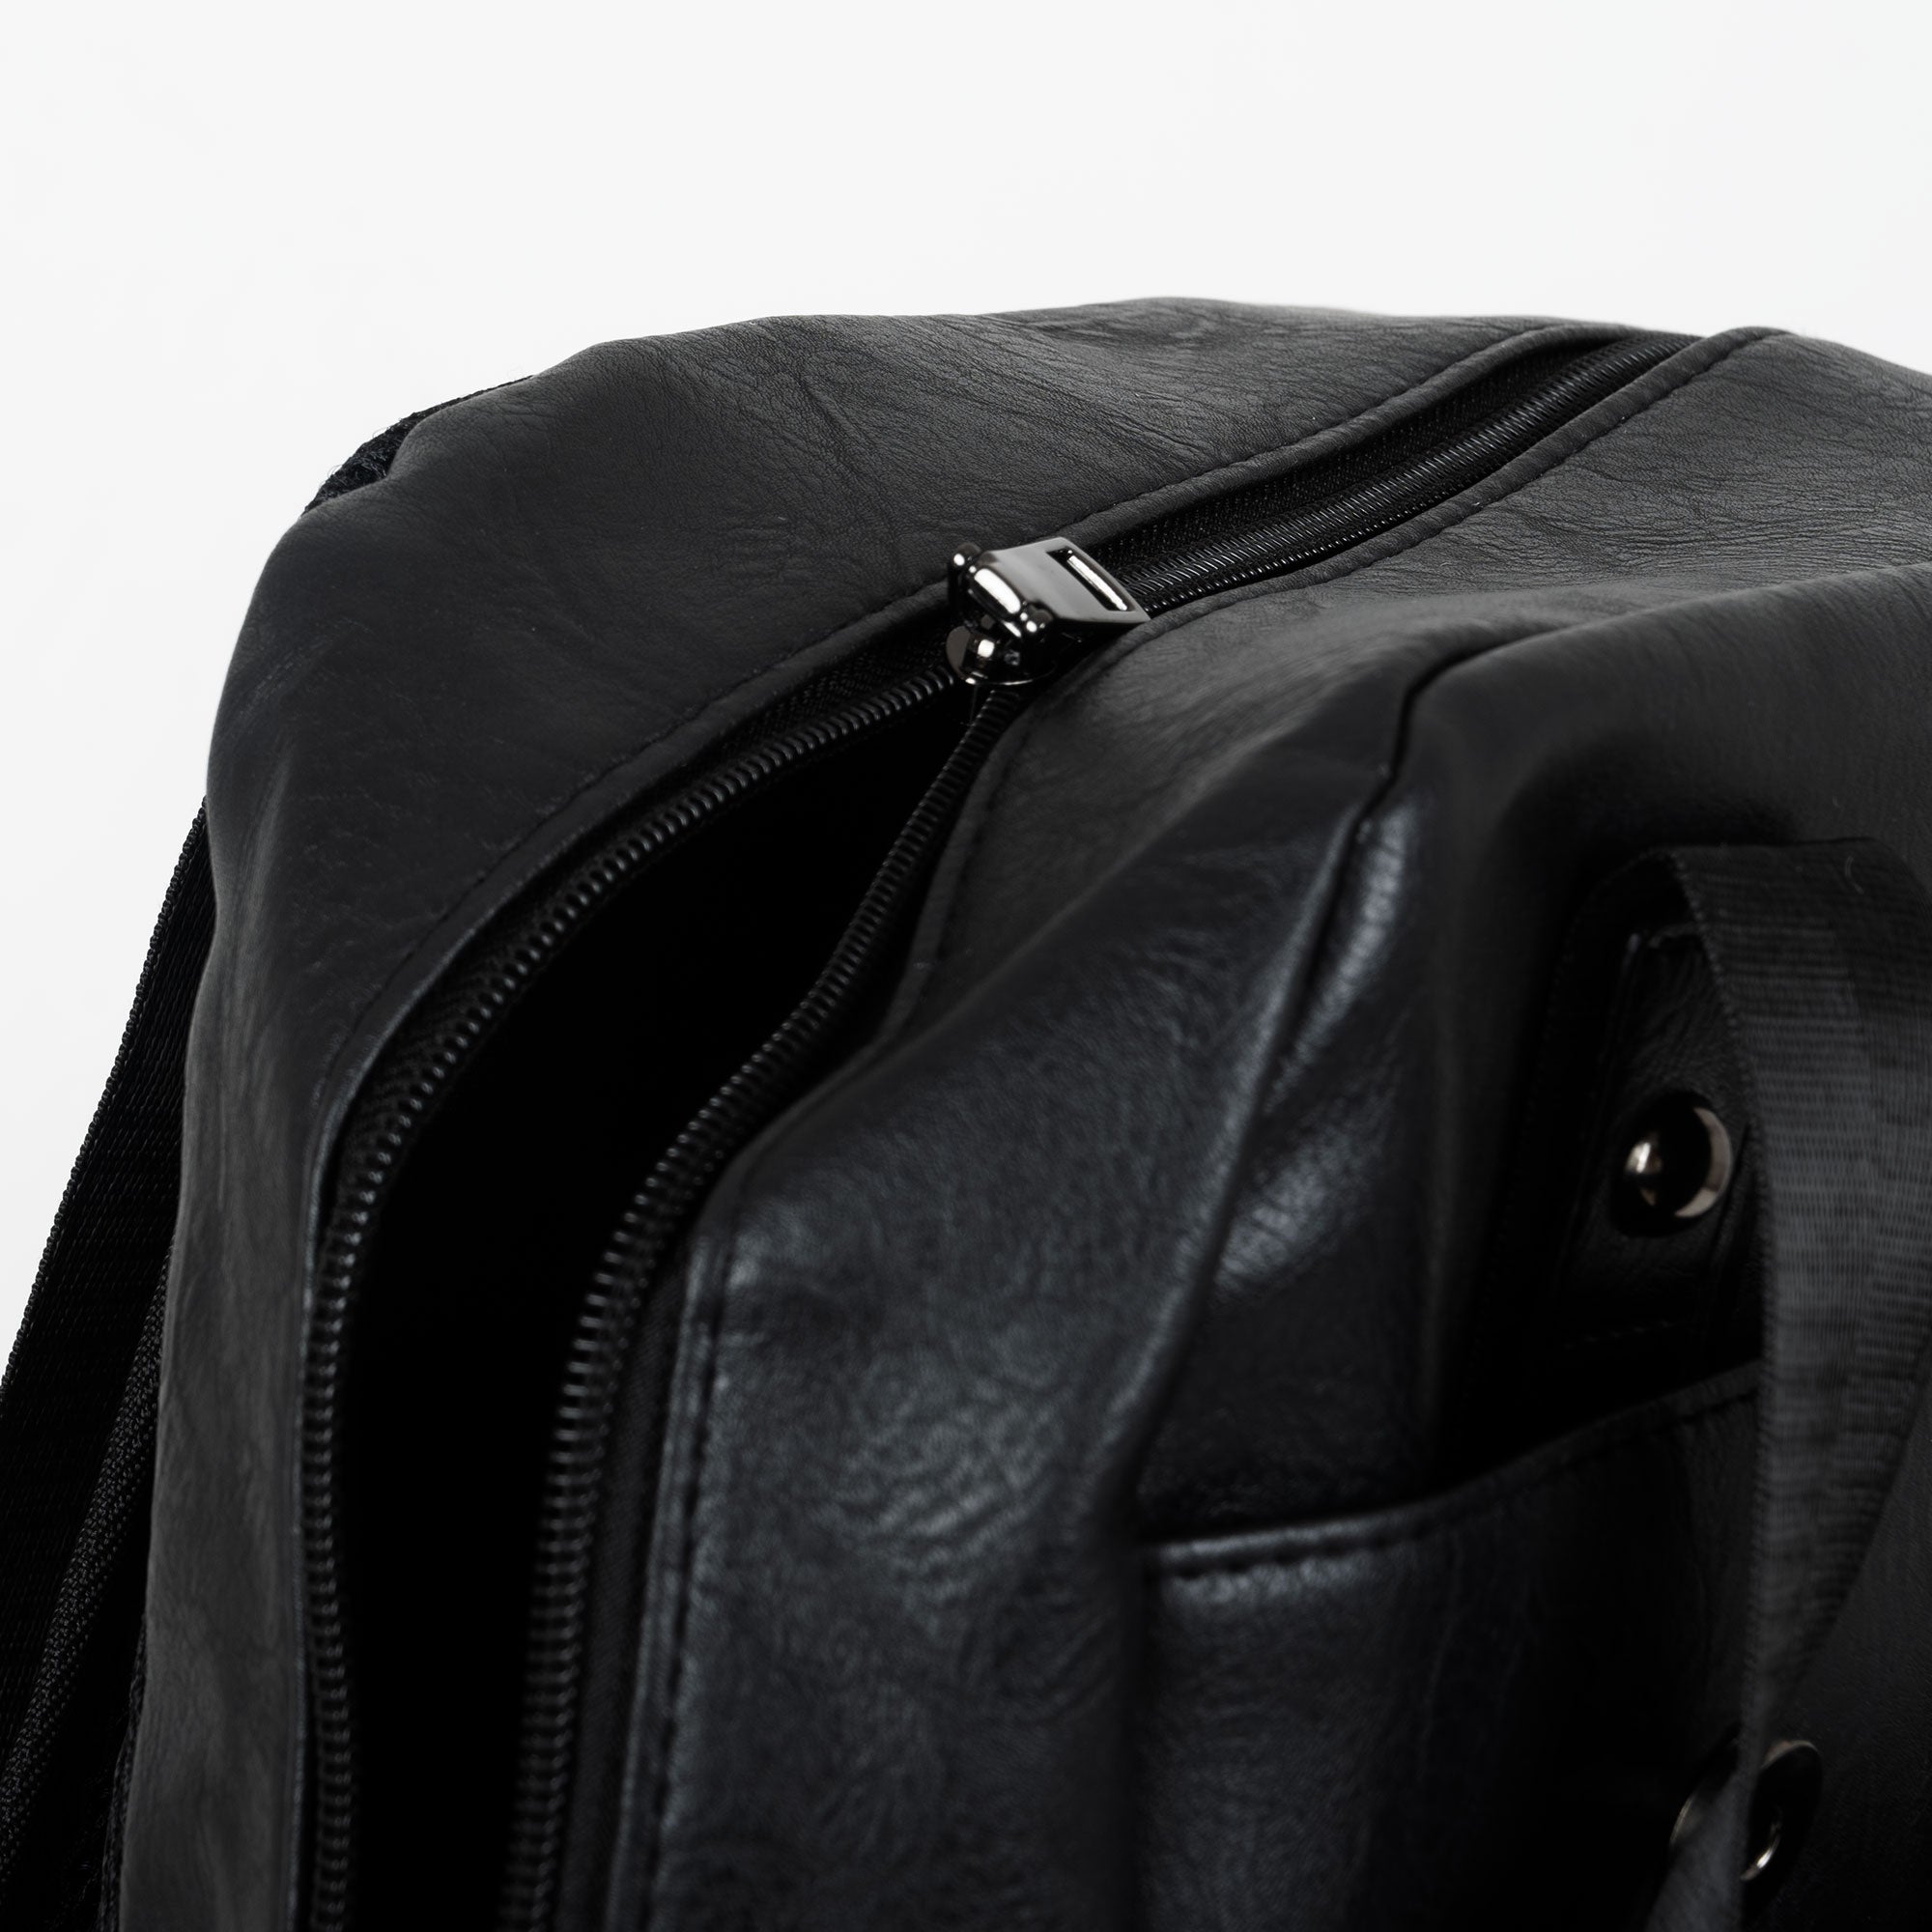 Leather Style buckle backpack